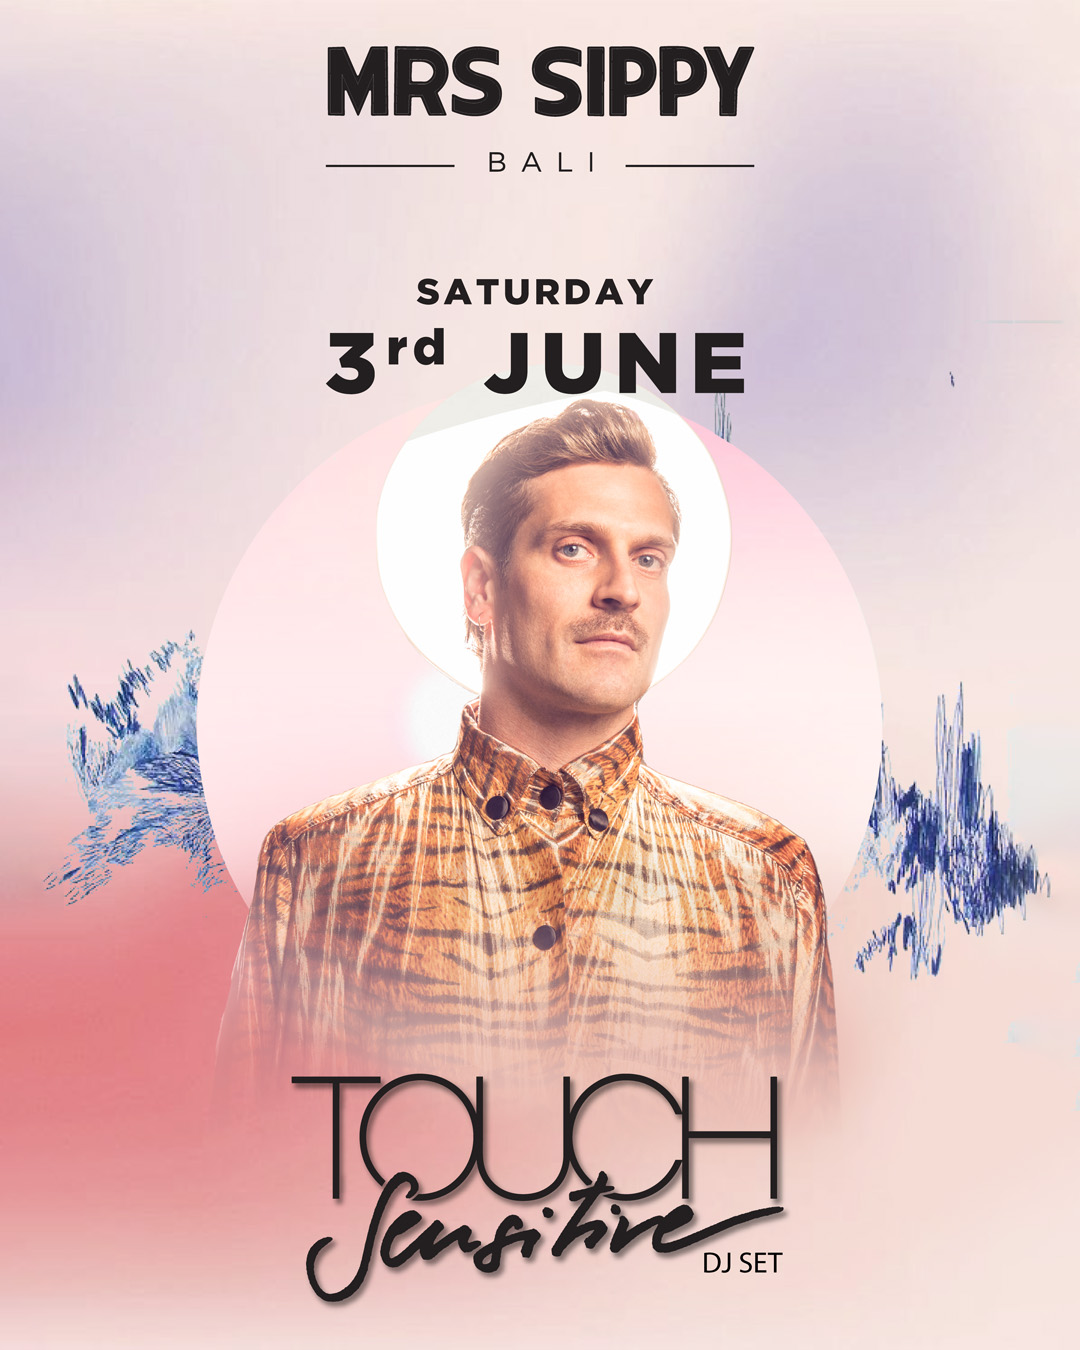 MRS SIPPY PRESENTS TOUCH SENSITIVE – SATURDAY JUNE 3RD thumbnail image